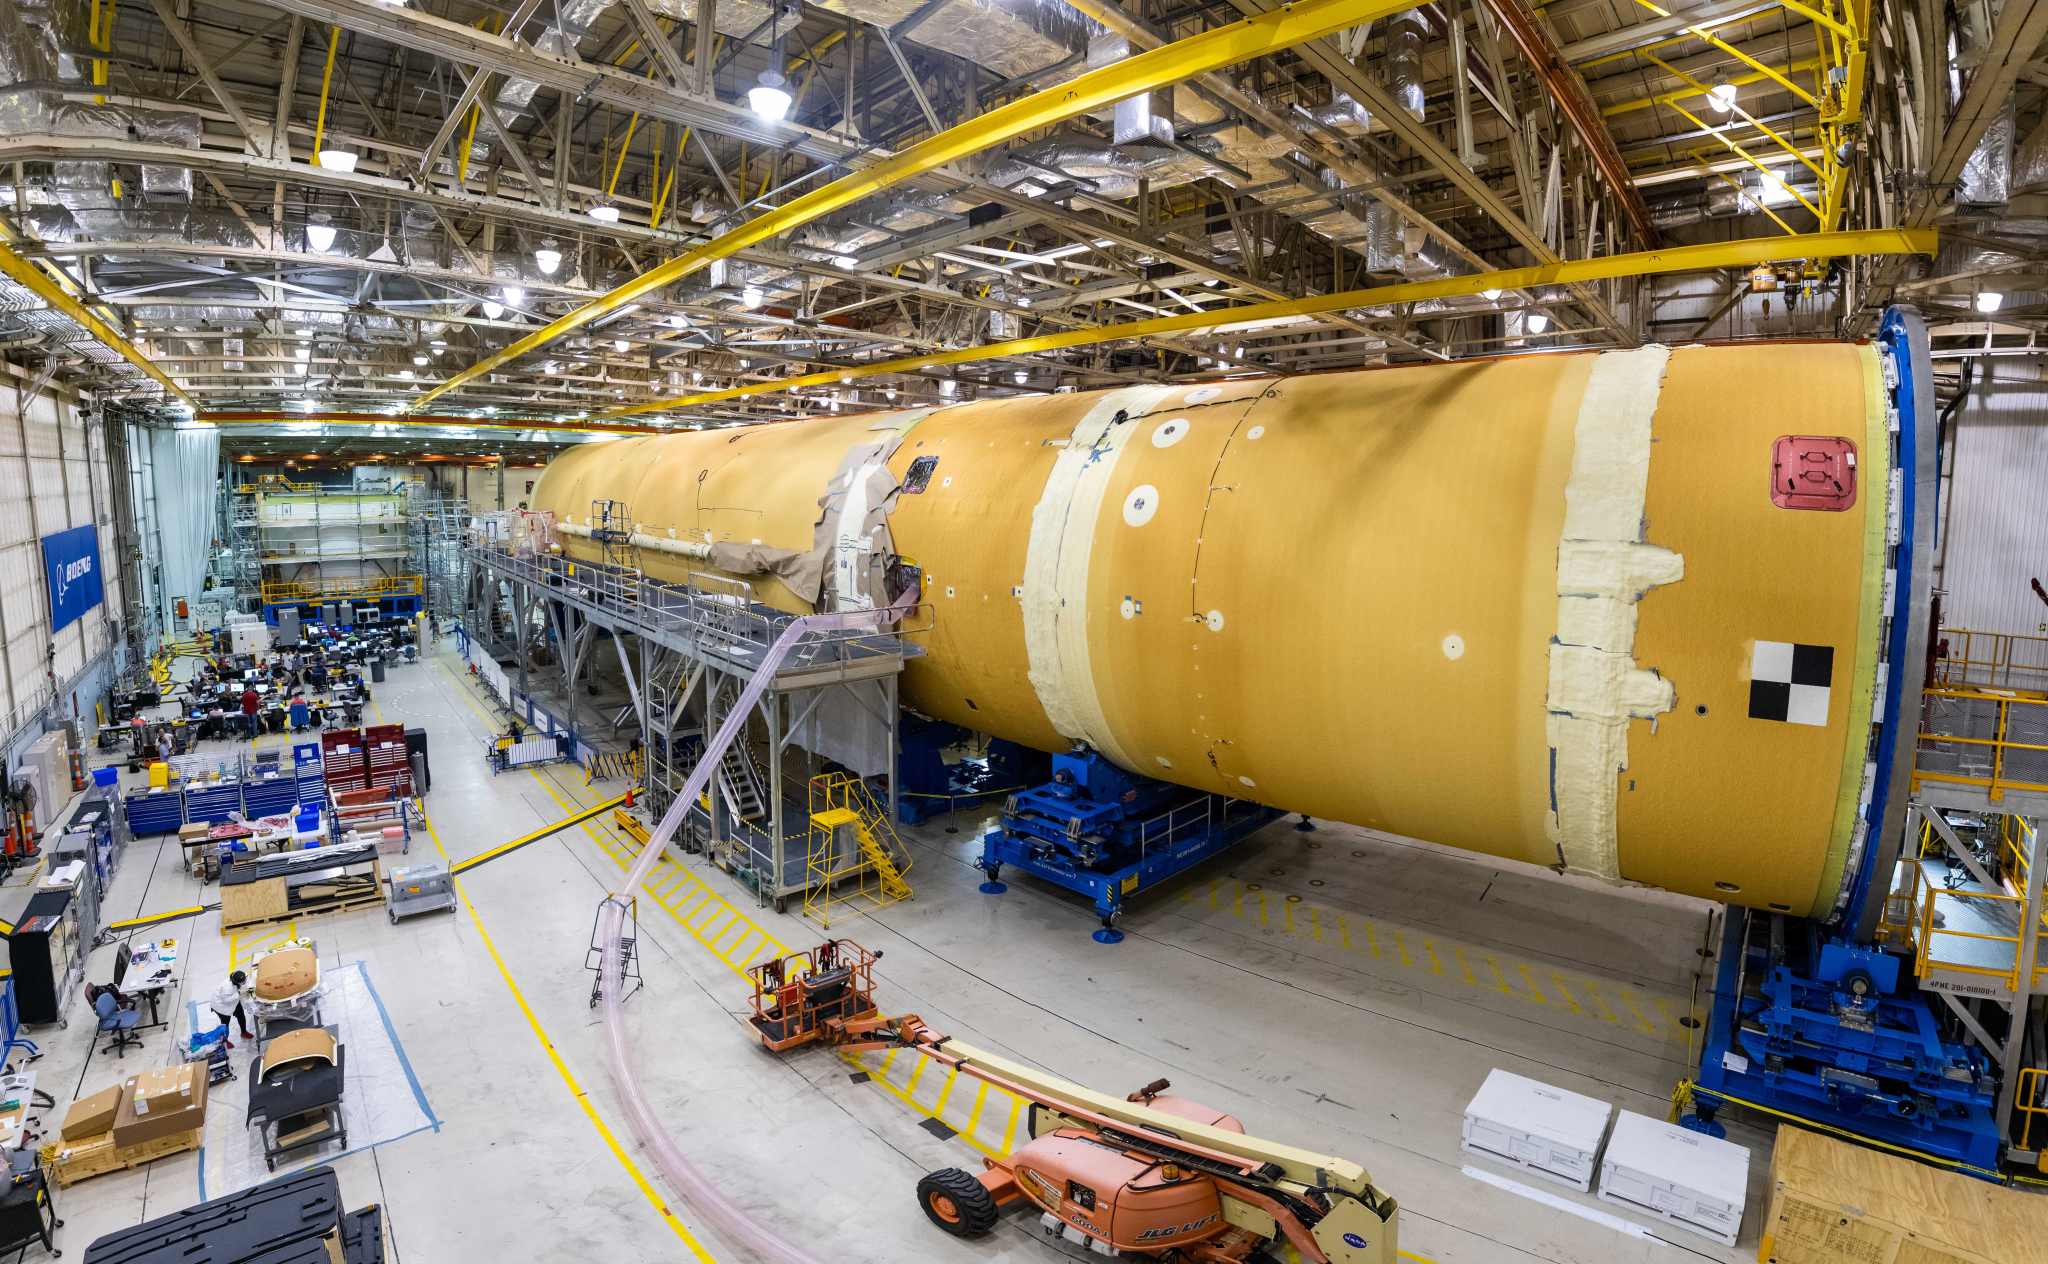 first core stage that will help power the agency's Space Launch System